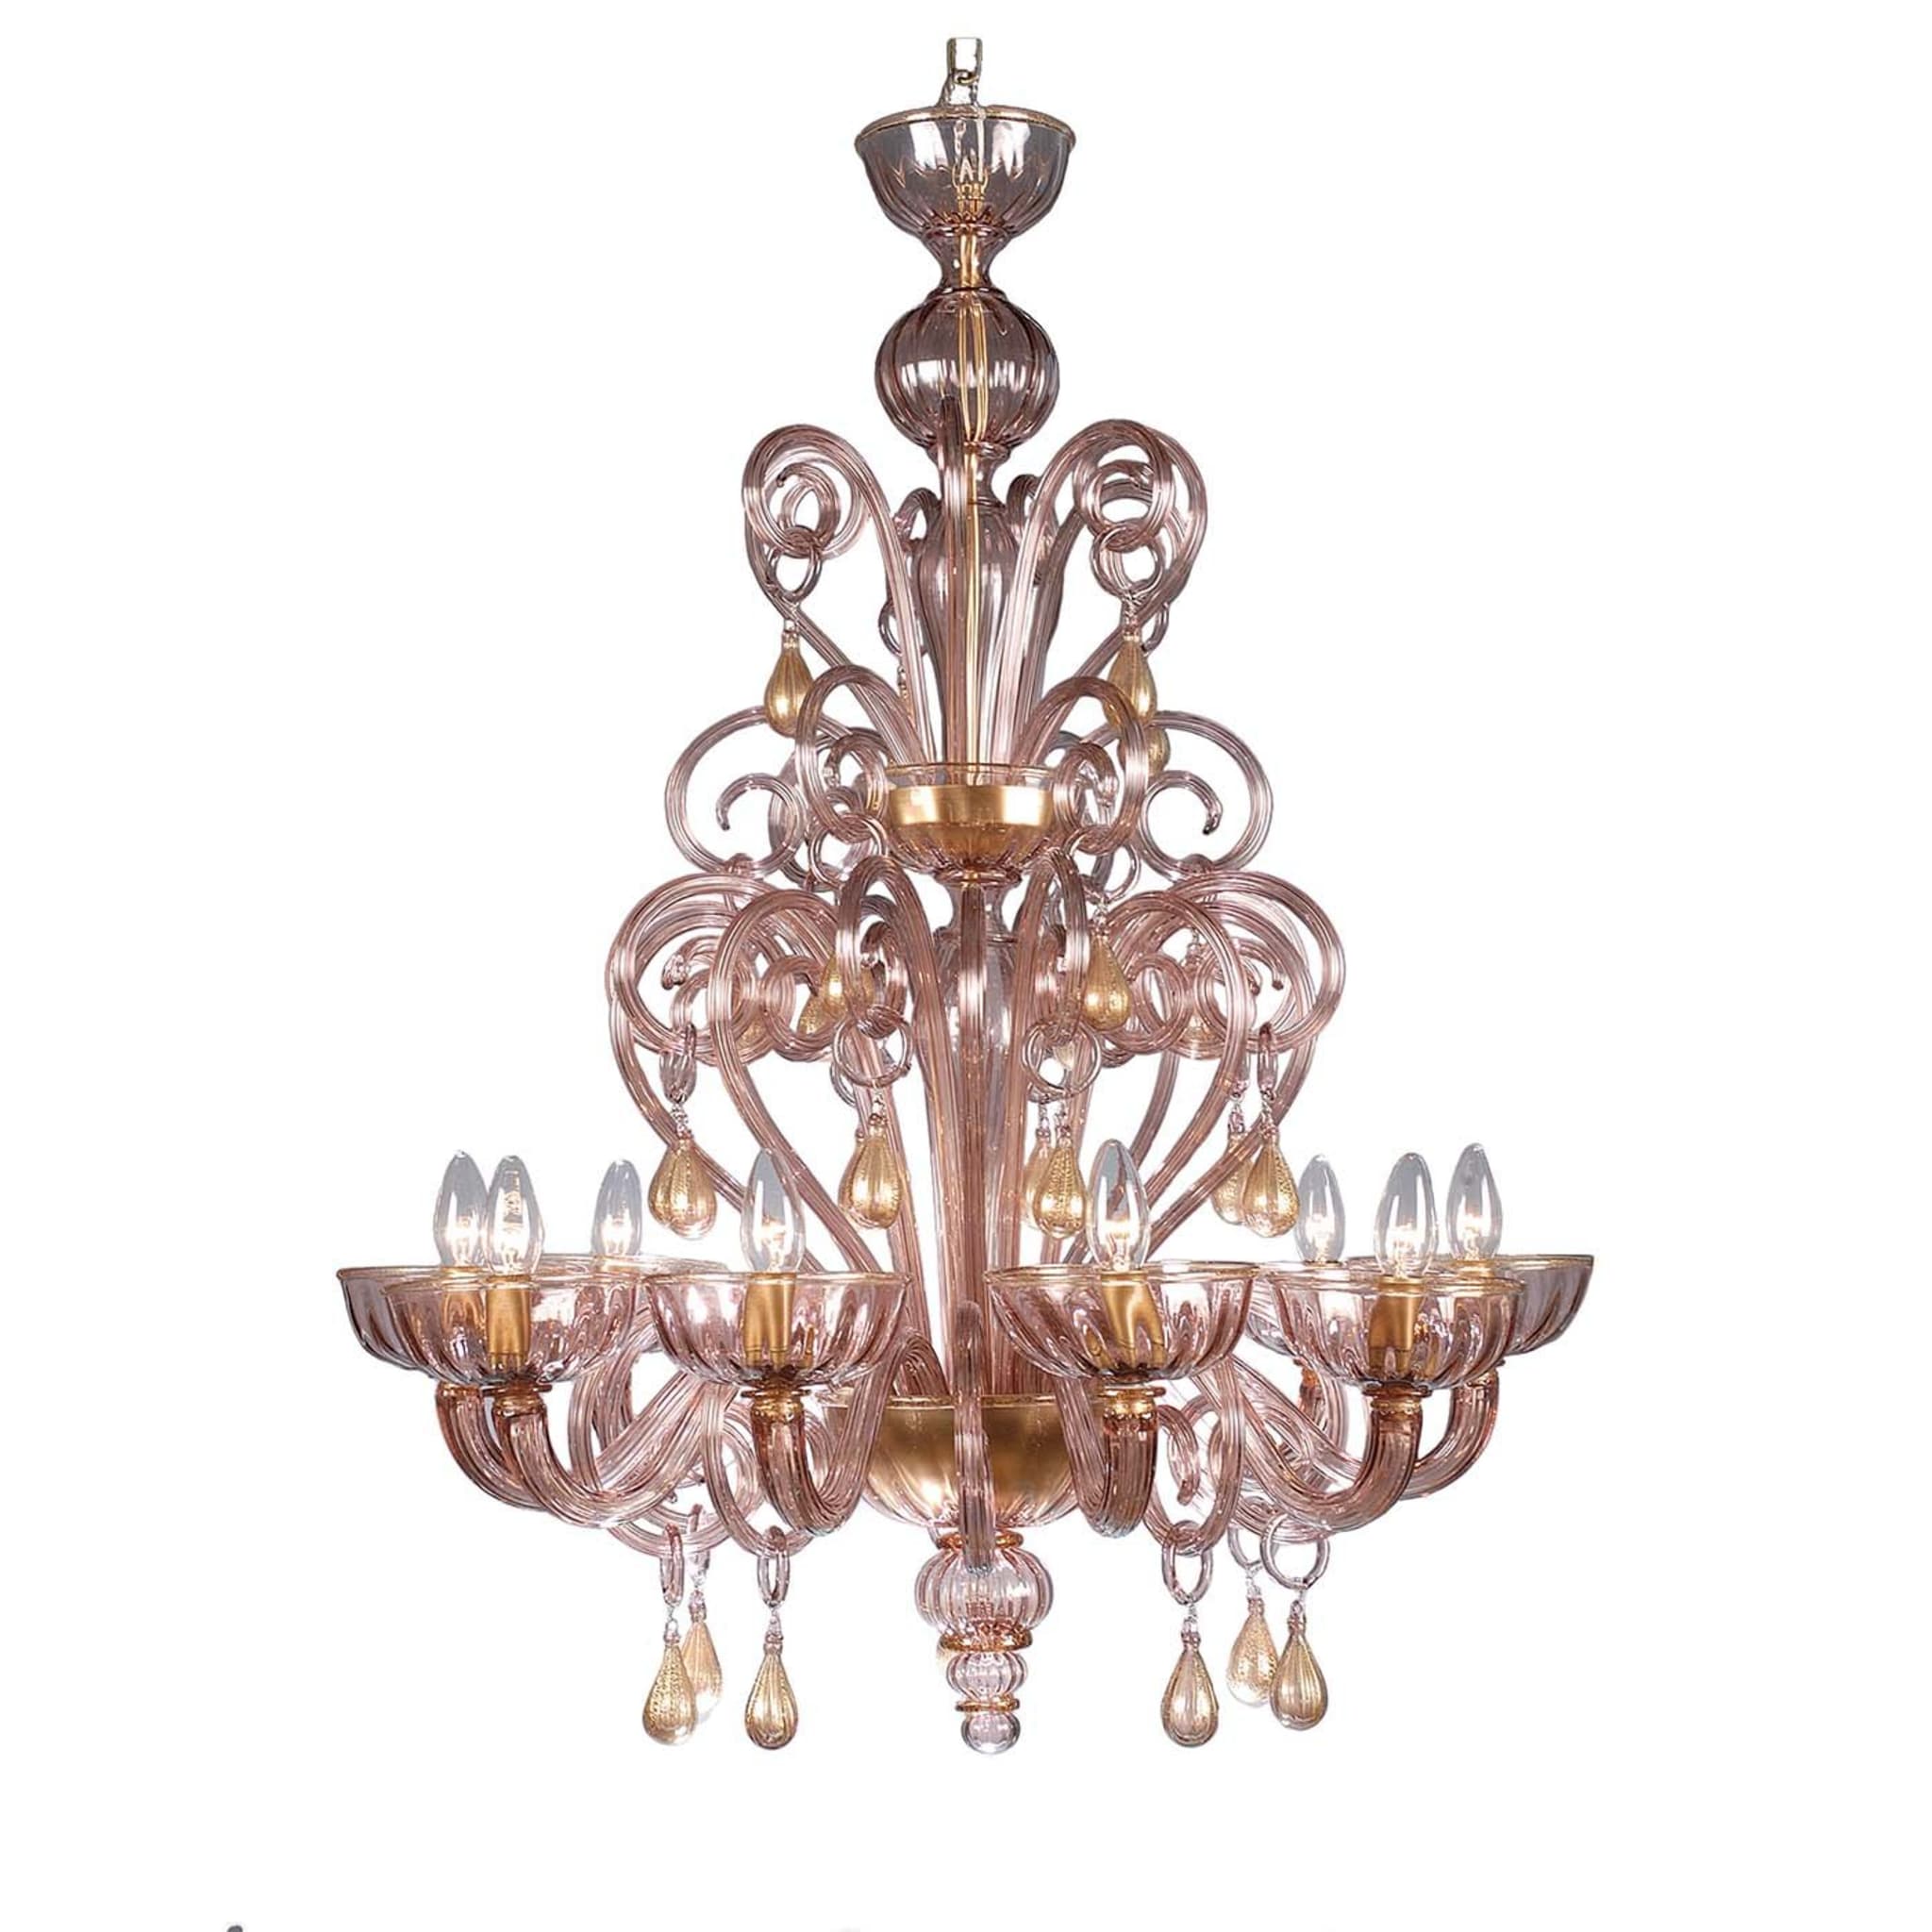 Debussy Chandelier - Main view